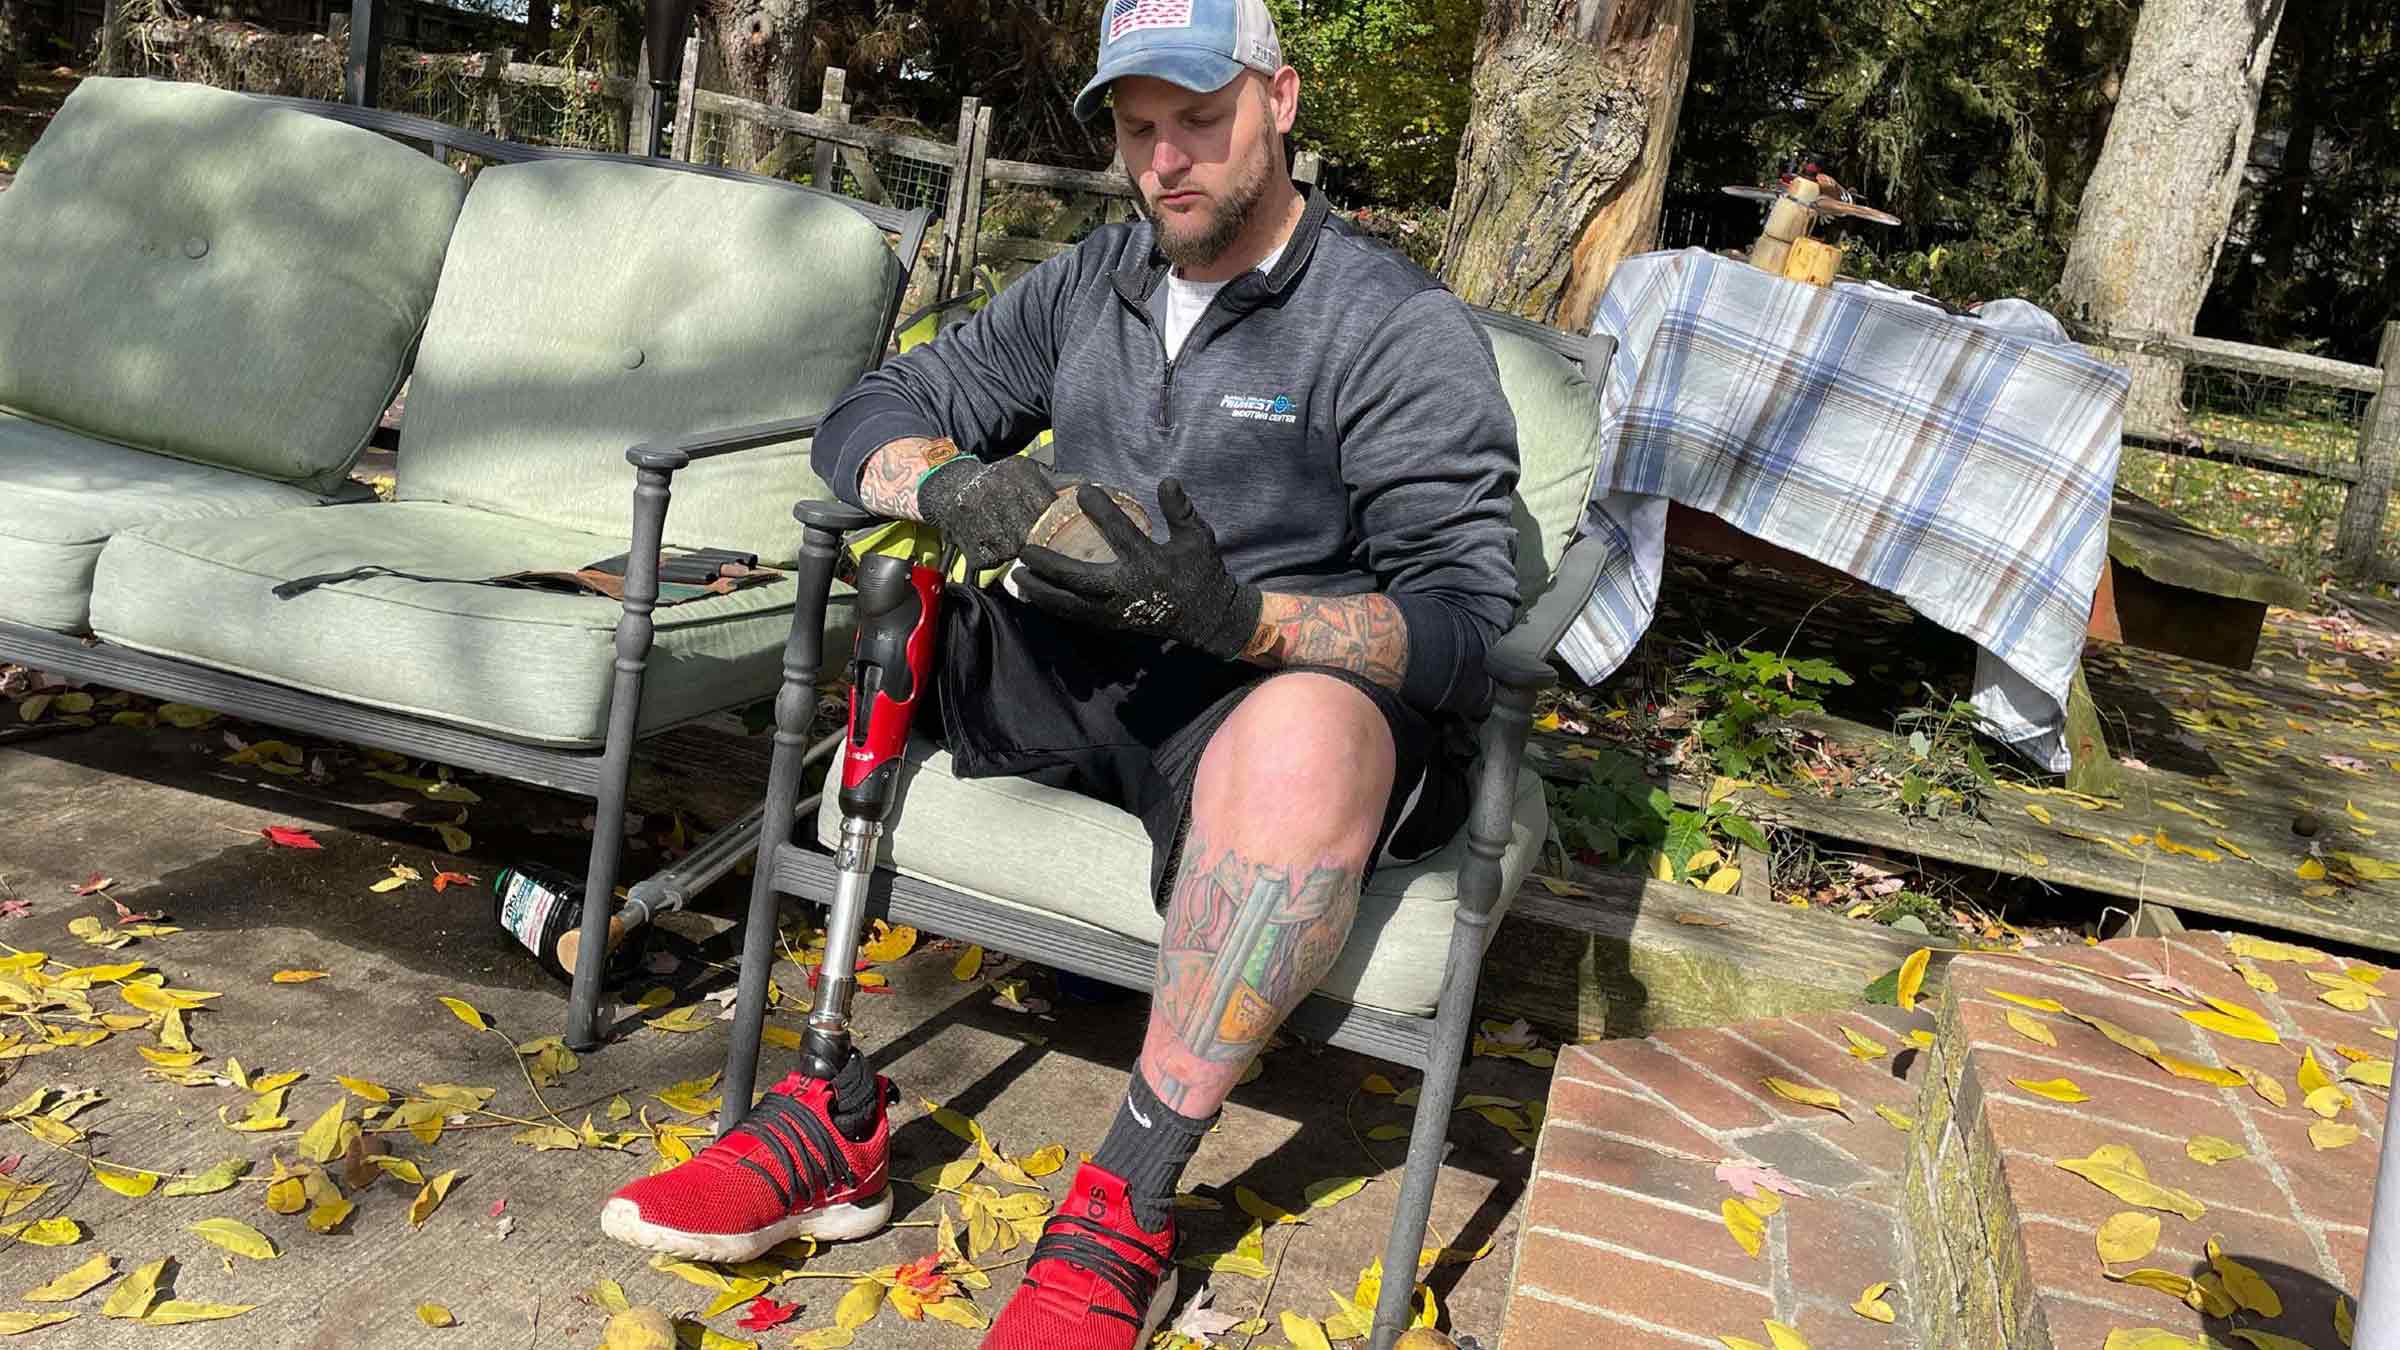 Broc Potts now has an advanced prosthetic that snaps onto a bar that was surgically implanted in this leg at the OSUCCC – James, allowing him to move more freely.